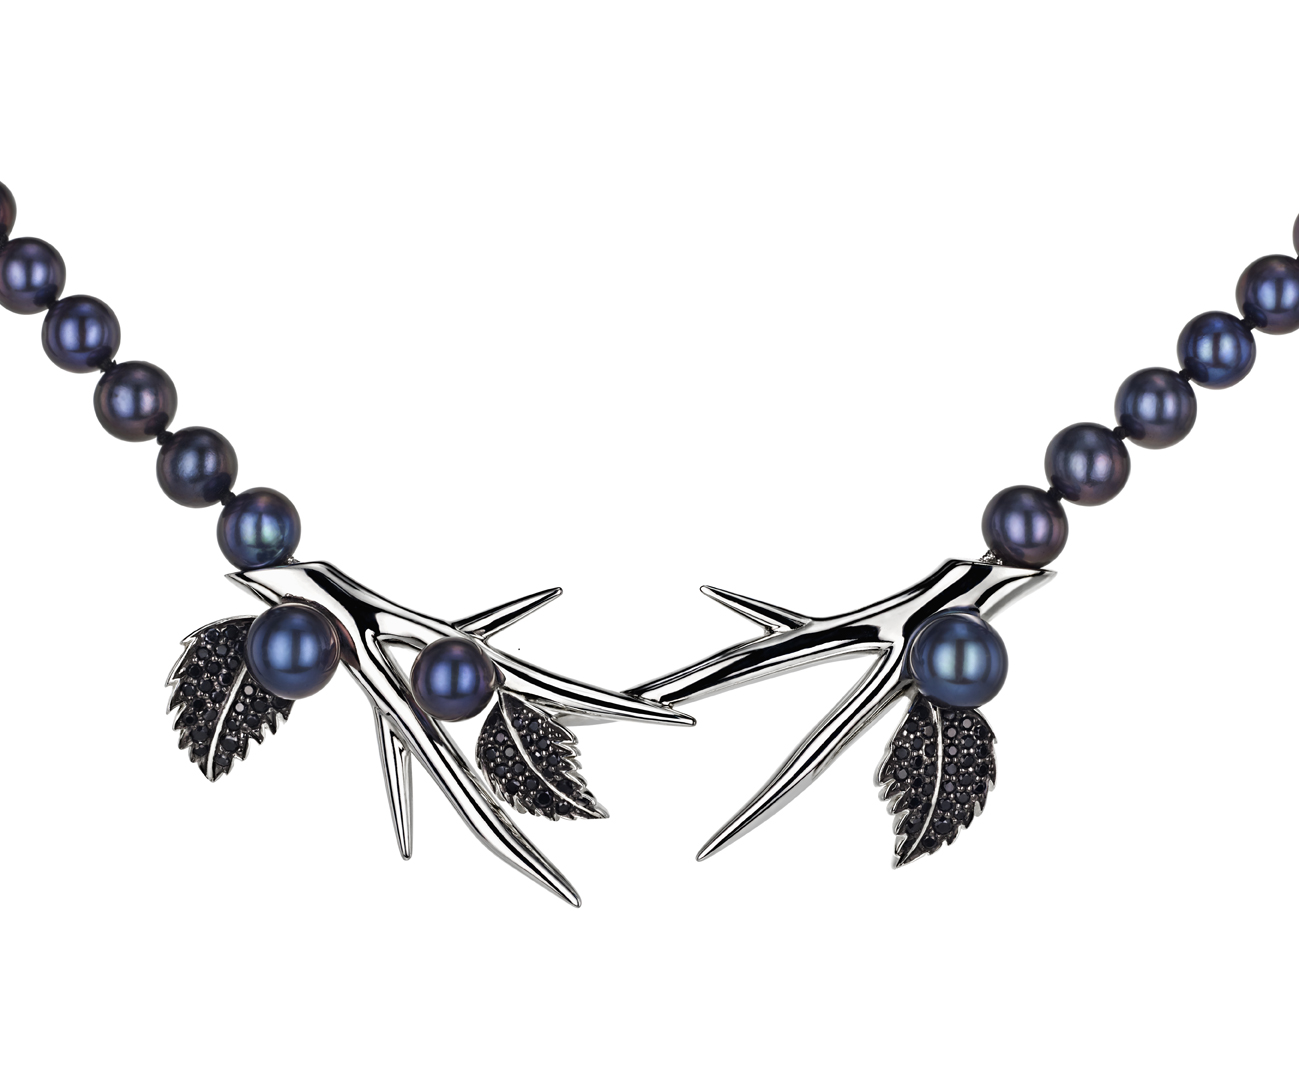 Pearl necklace with silver branches and leaves with black gems.